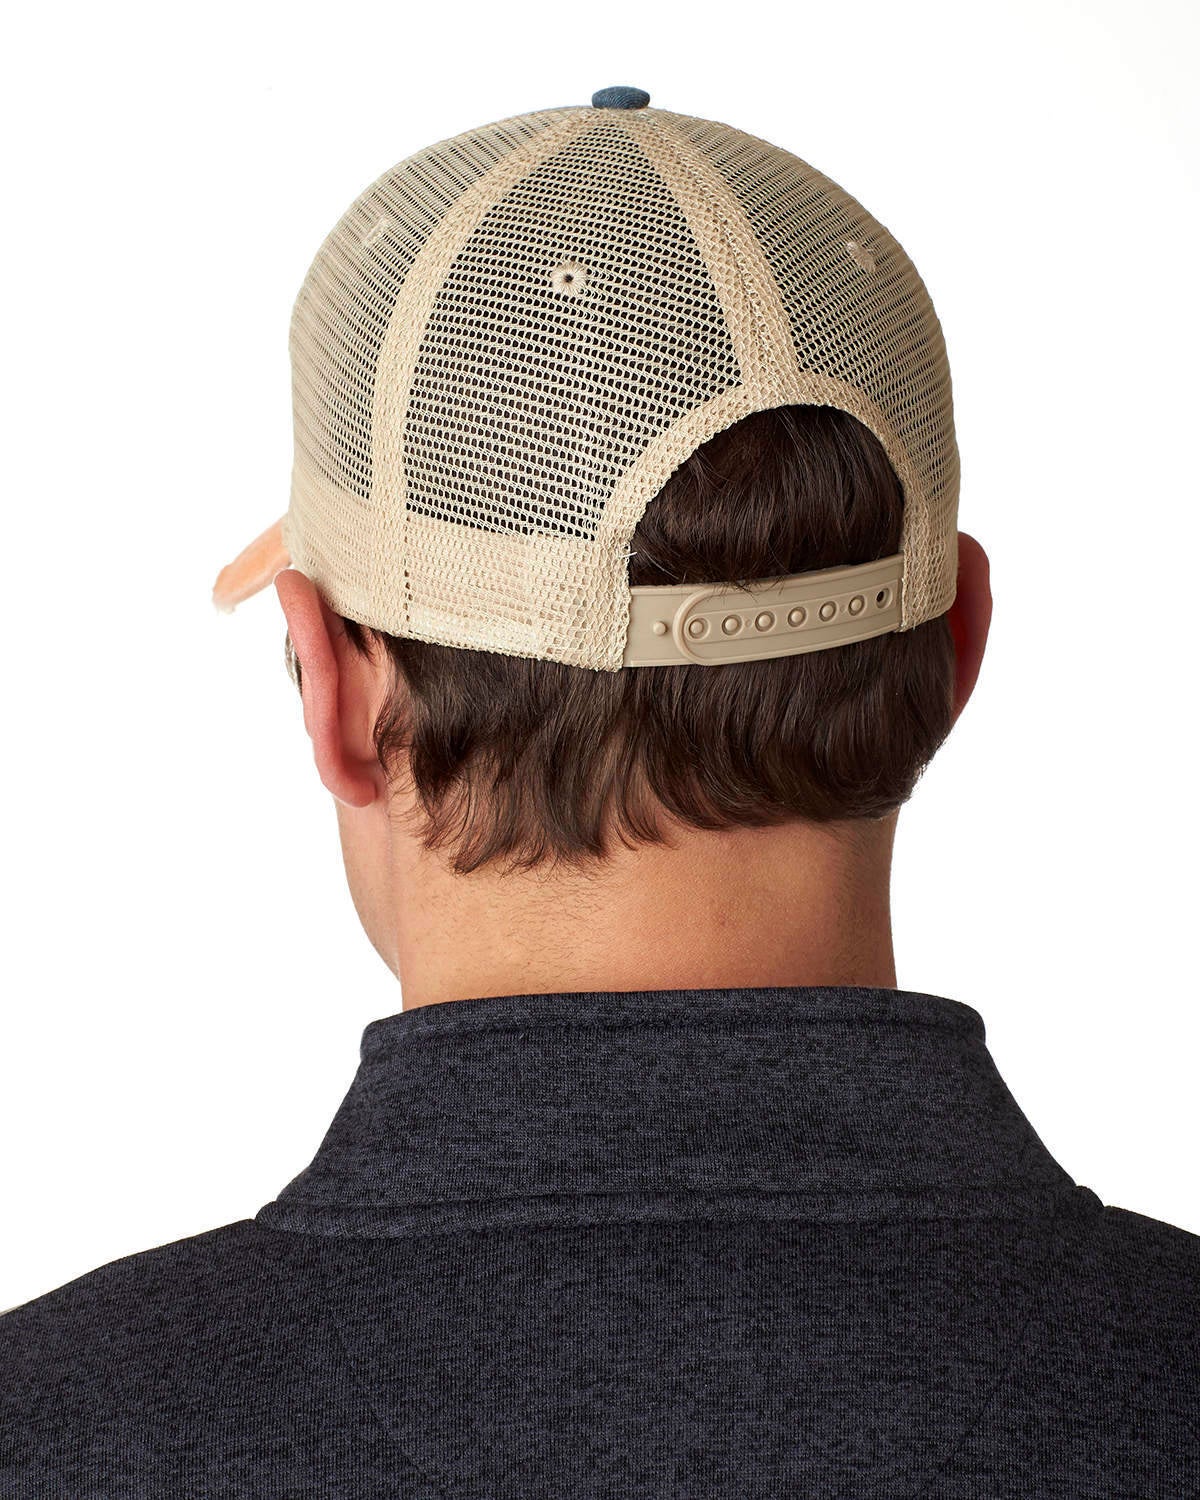 Virginia Hat - Distressed Snapback Trucker Hat - Virginia State Outline - Many Colors Available